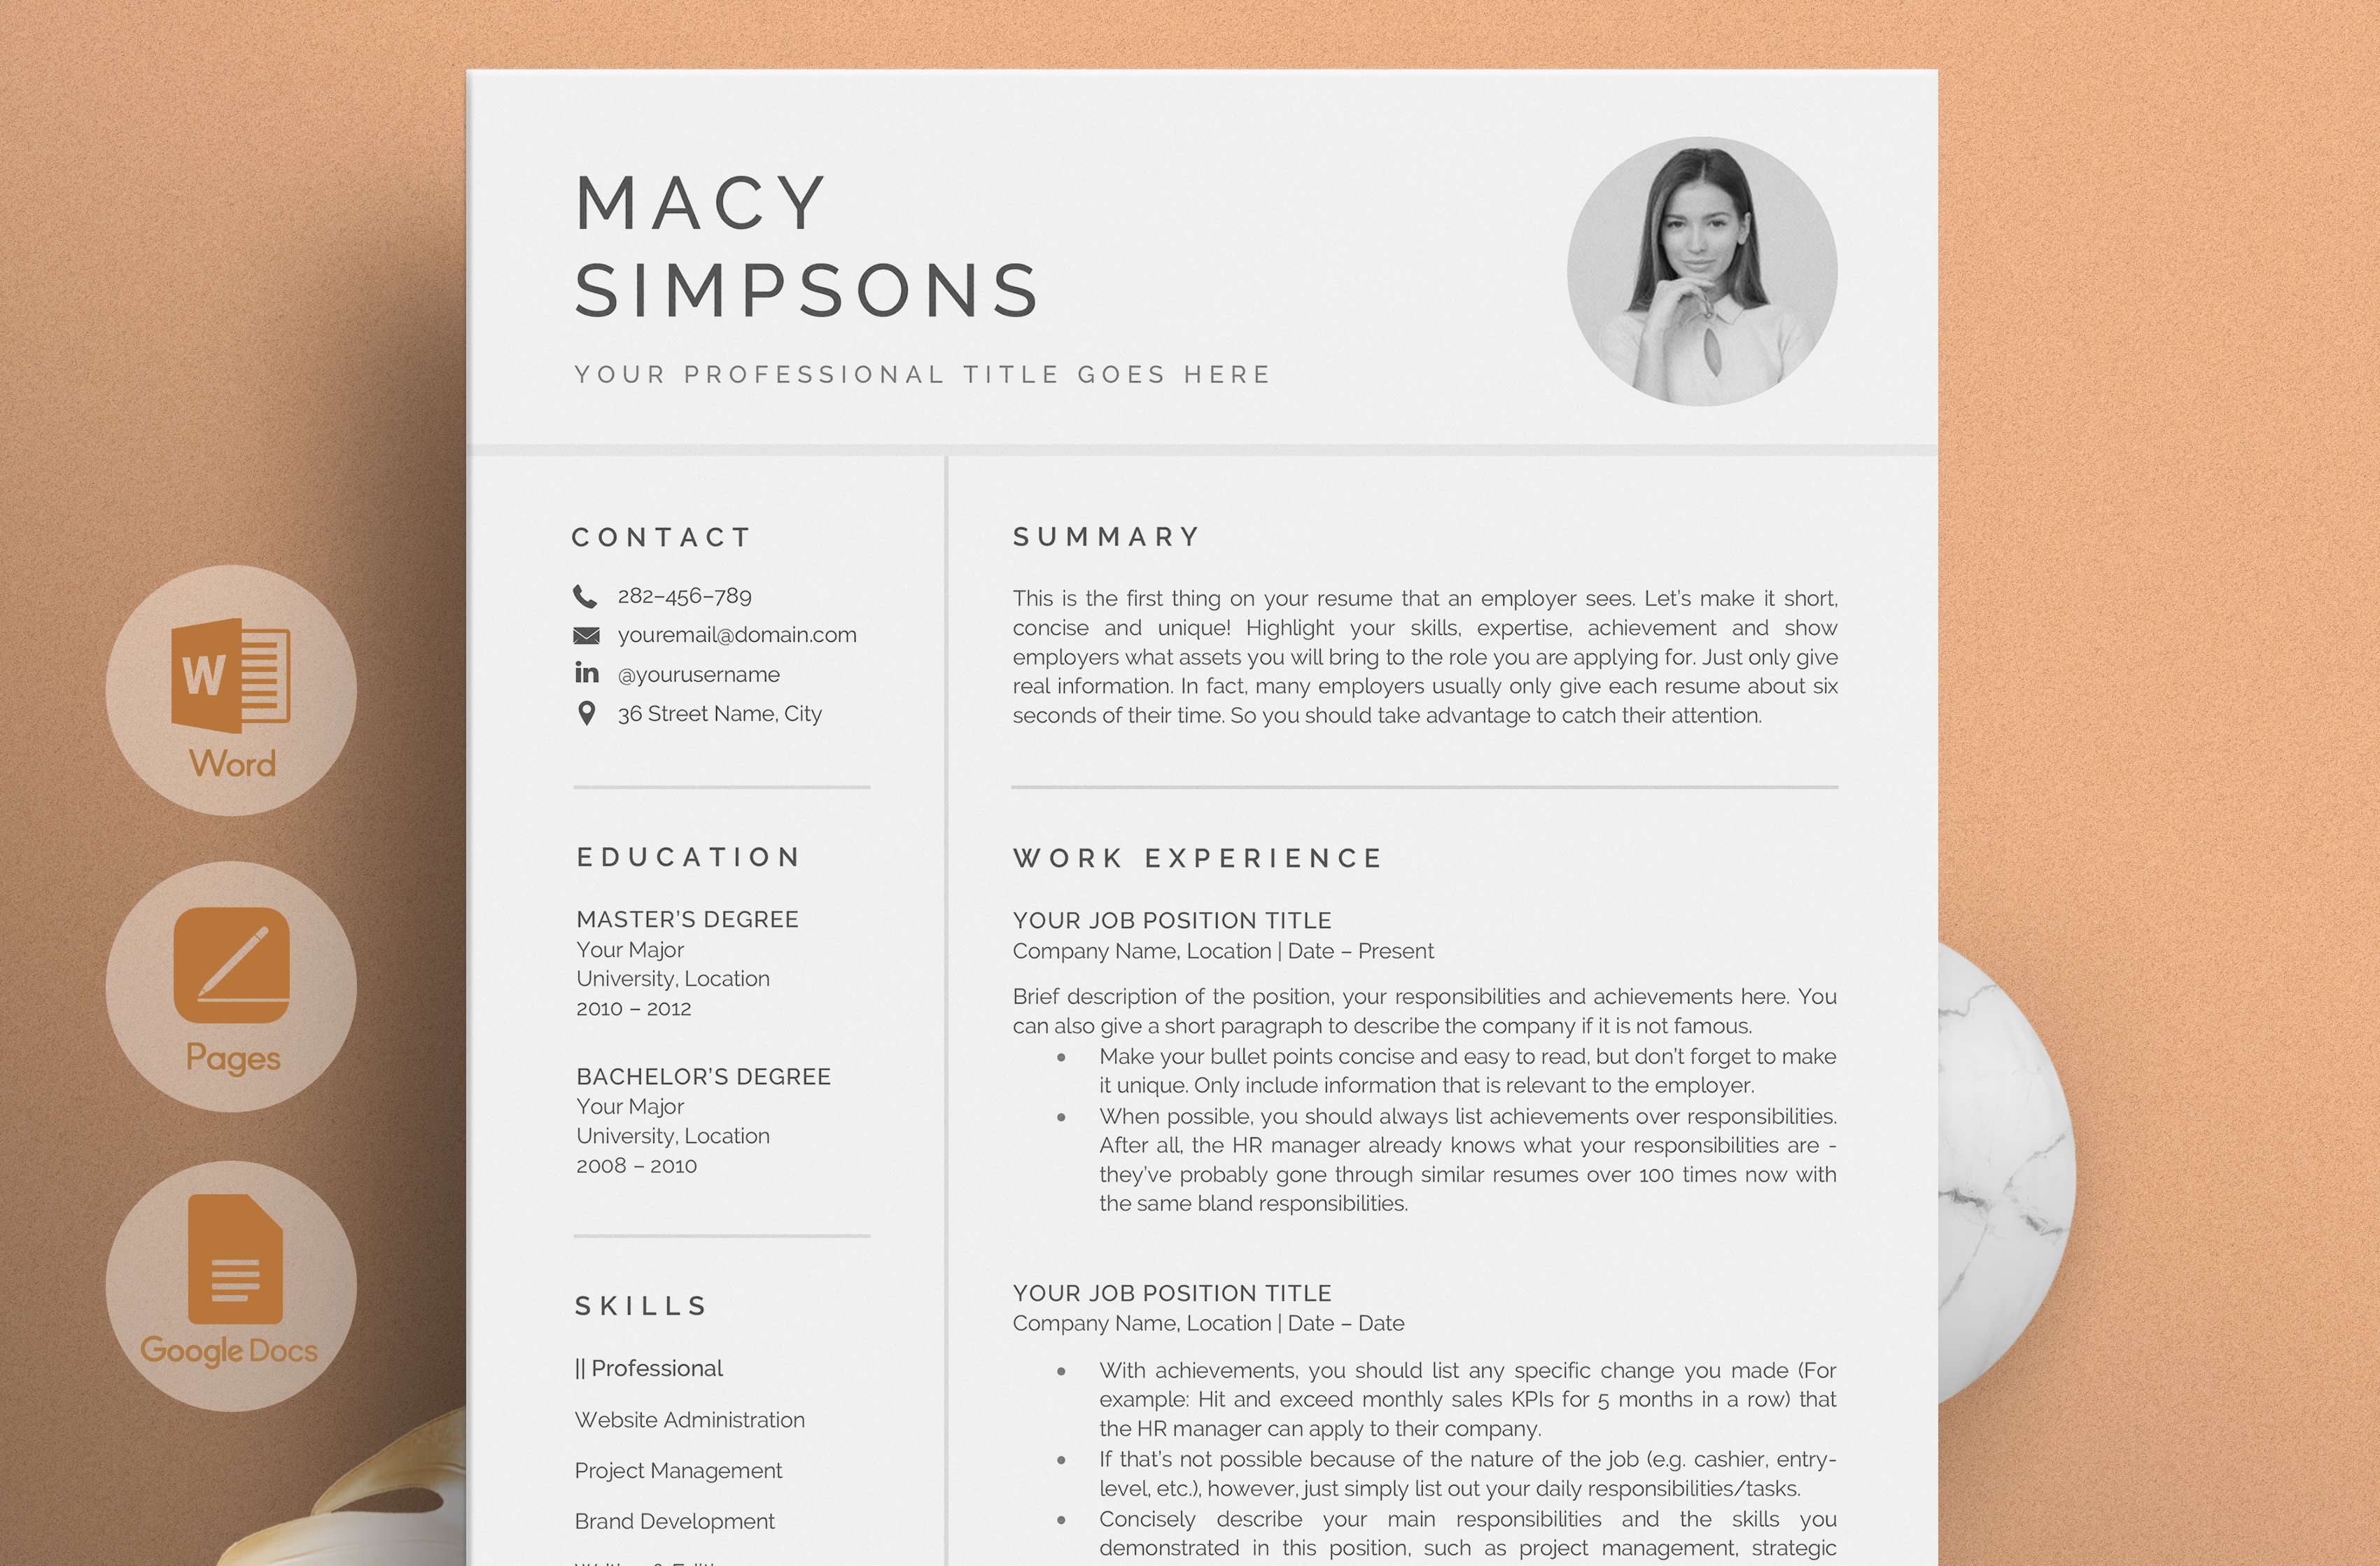 Resume/CV - The Macy cover image.